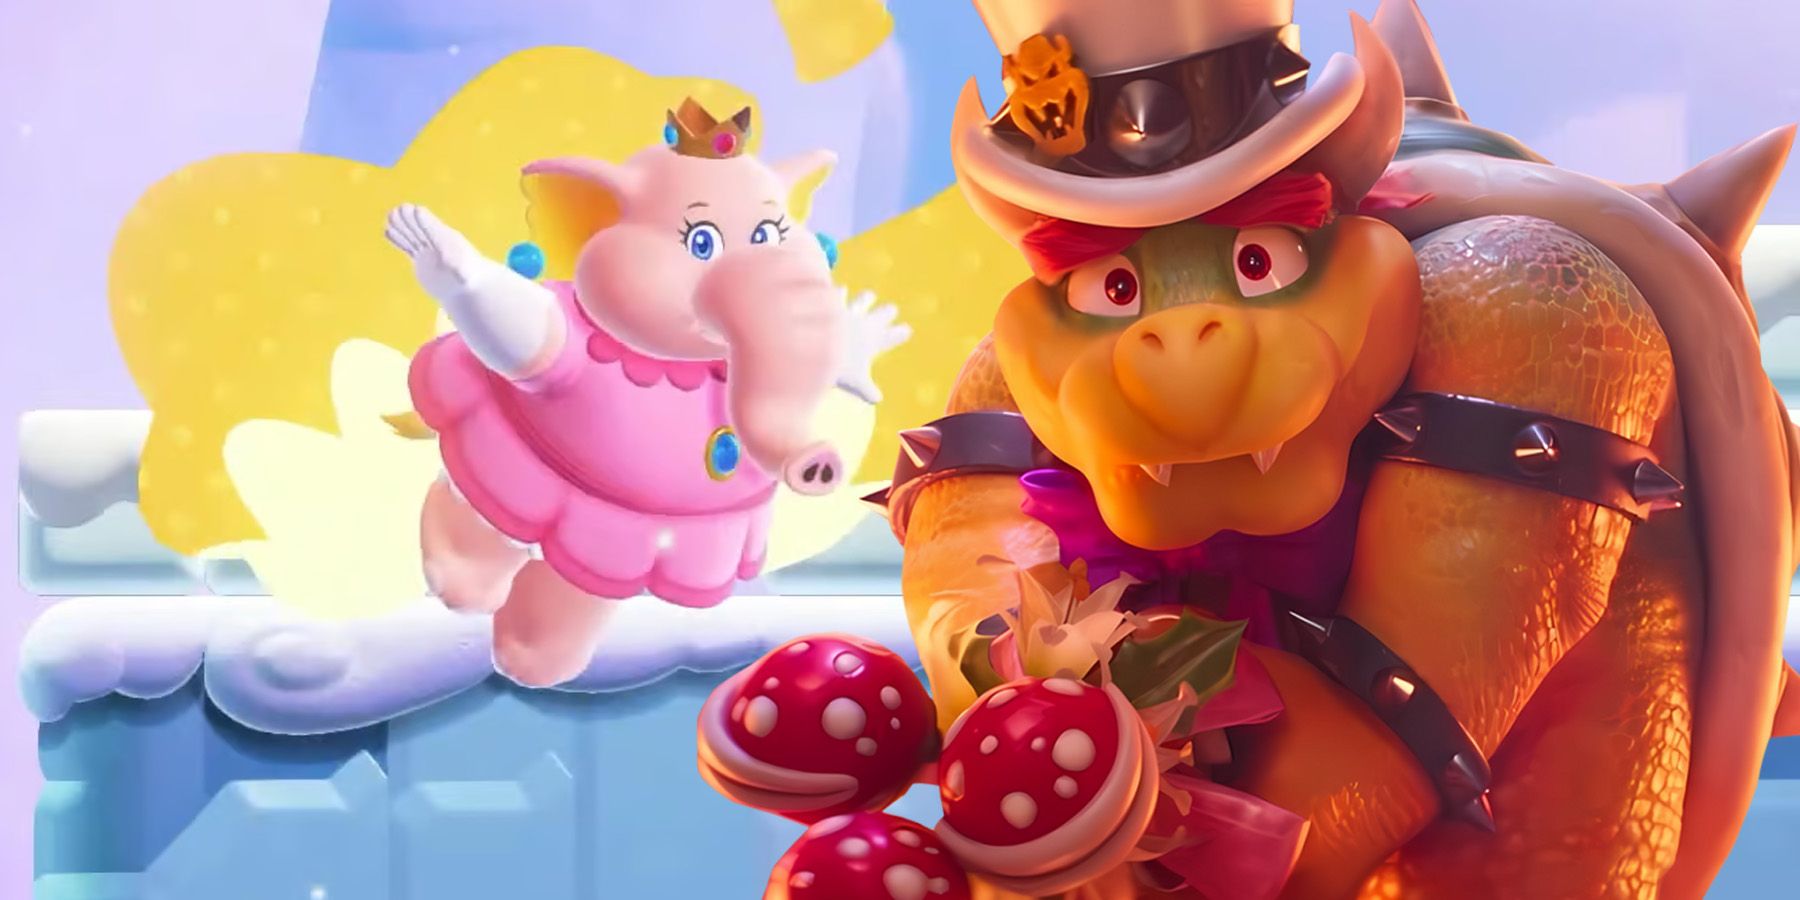 Bowser isn't up to the tusk of wooing elephant Peach in this Super Mario  Bros Wonder animation